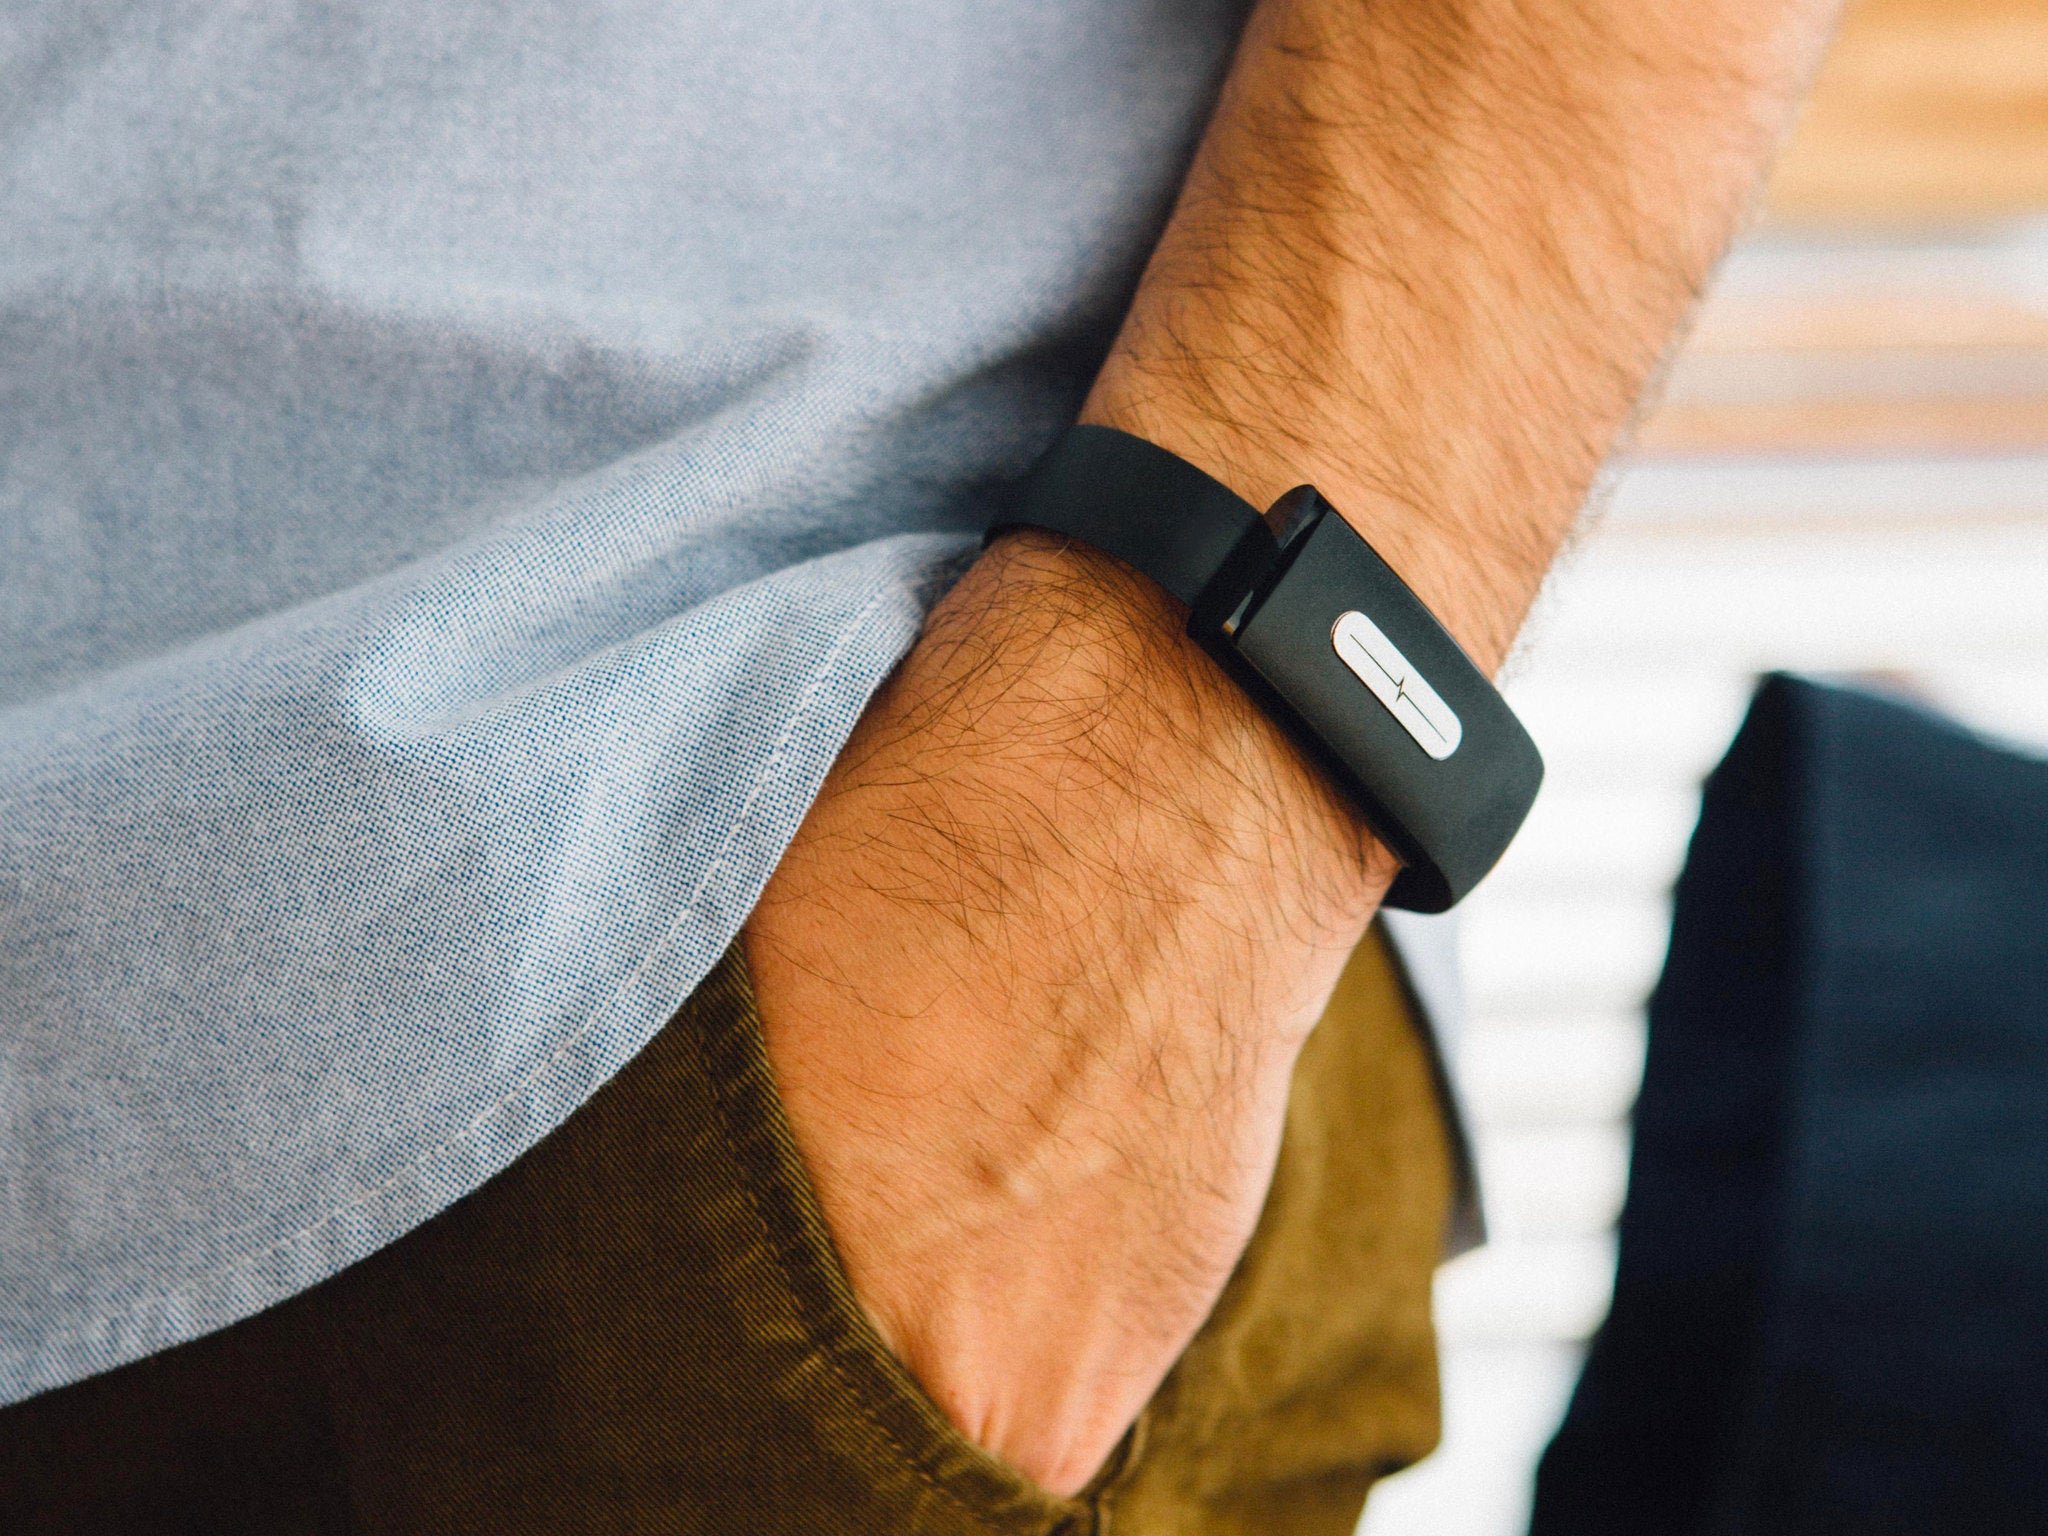 The Nymi Band uses Bluetooth to pair with a Mac, Windows or Android app